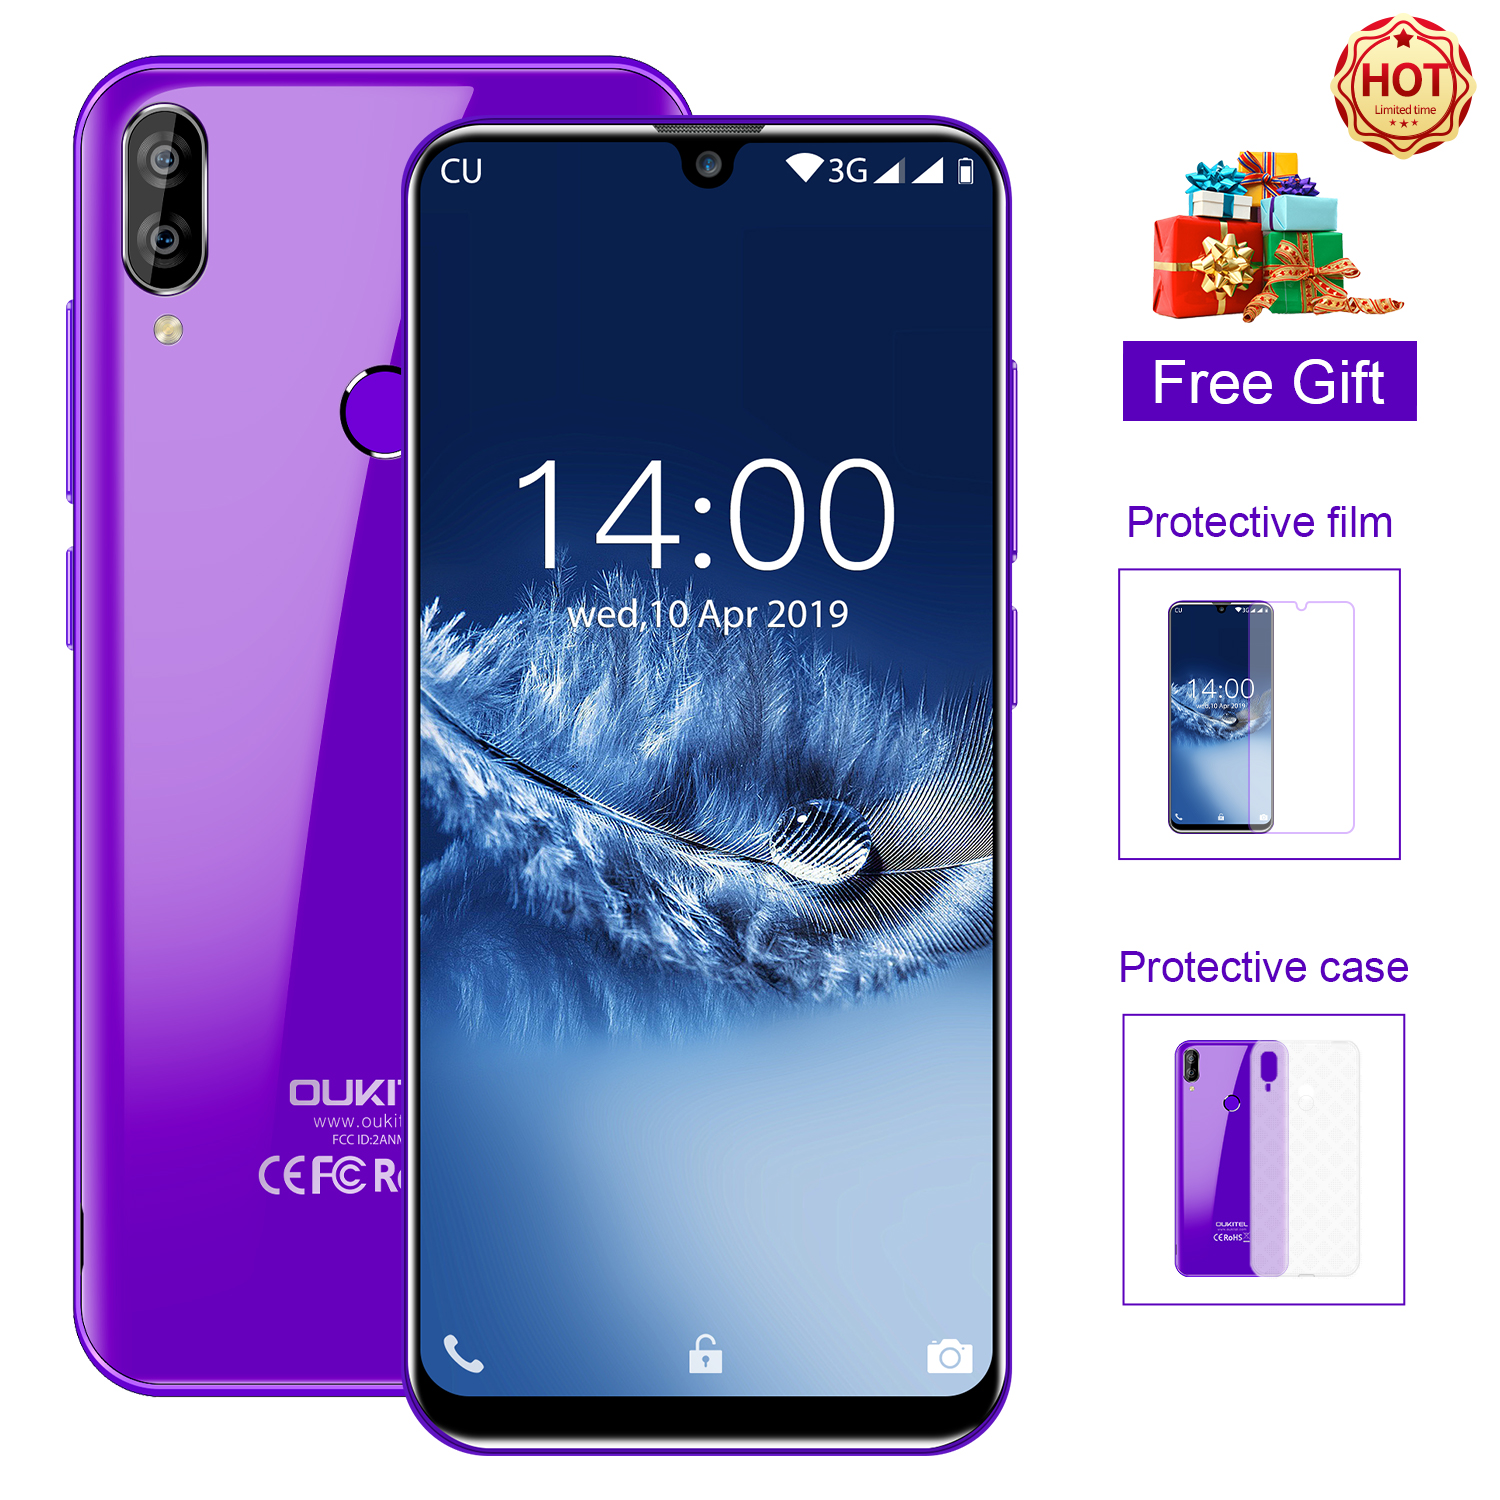 Oukitel C16 " Mobile phone 2+16 GB Android 9.0 support 5G/2.4G wifi with Face ID